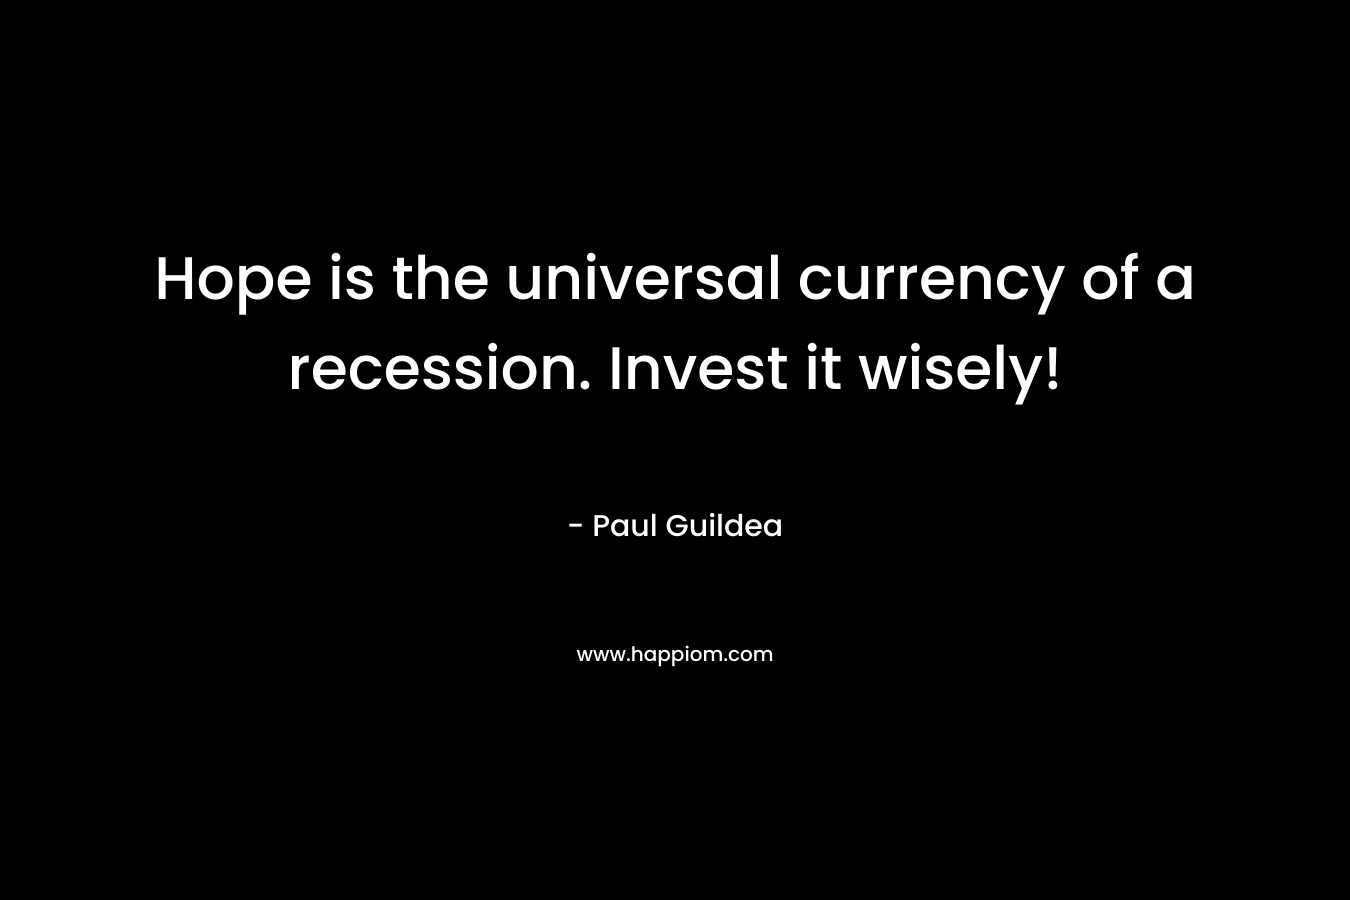 Hope is the universal currency of a recession. Invest it wisely! – Paul Guildea